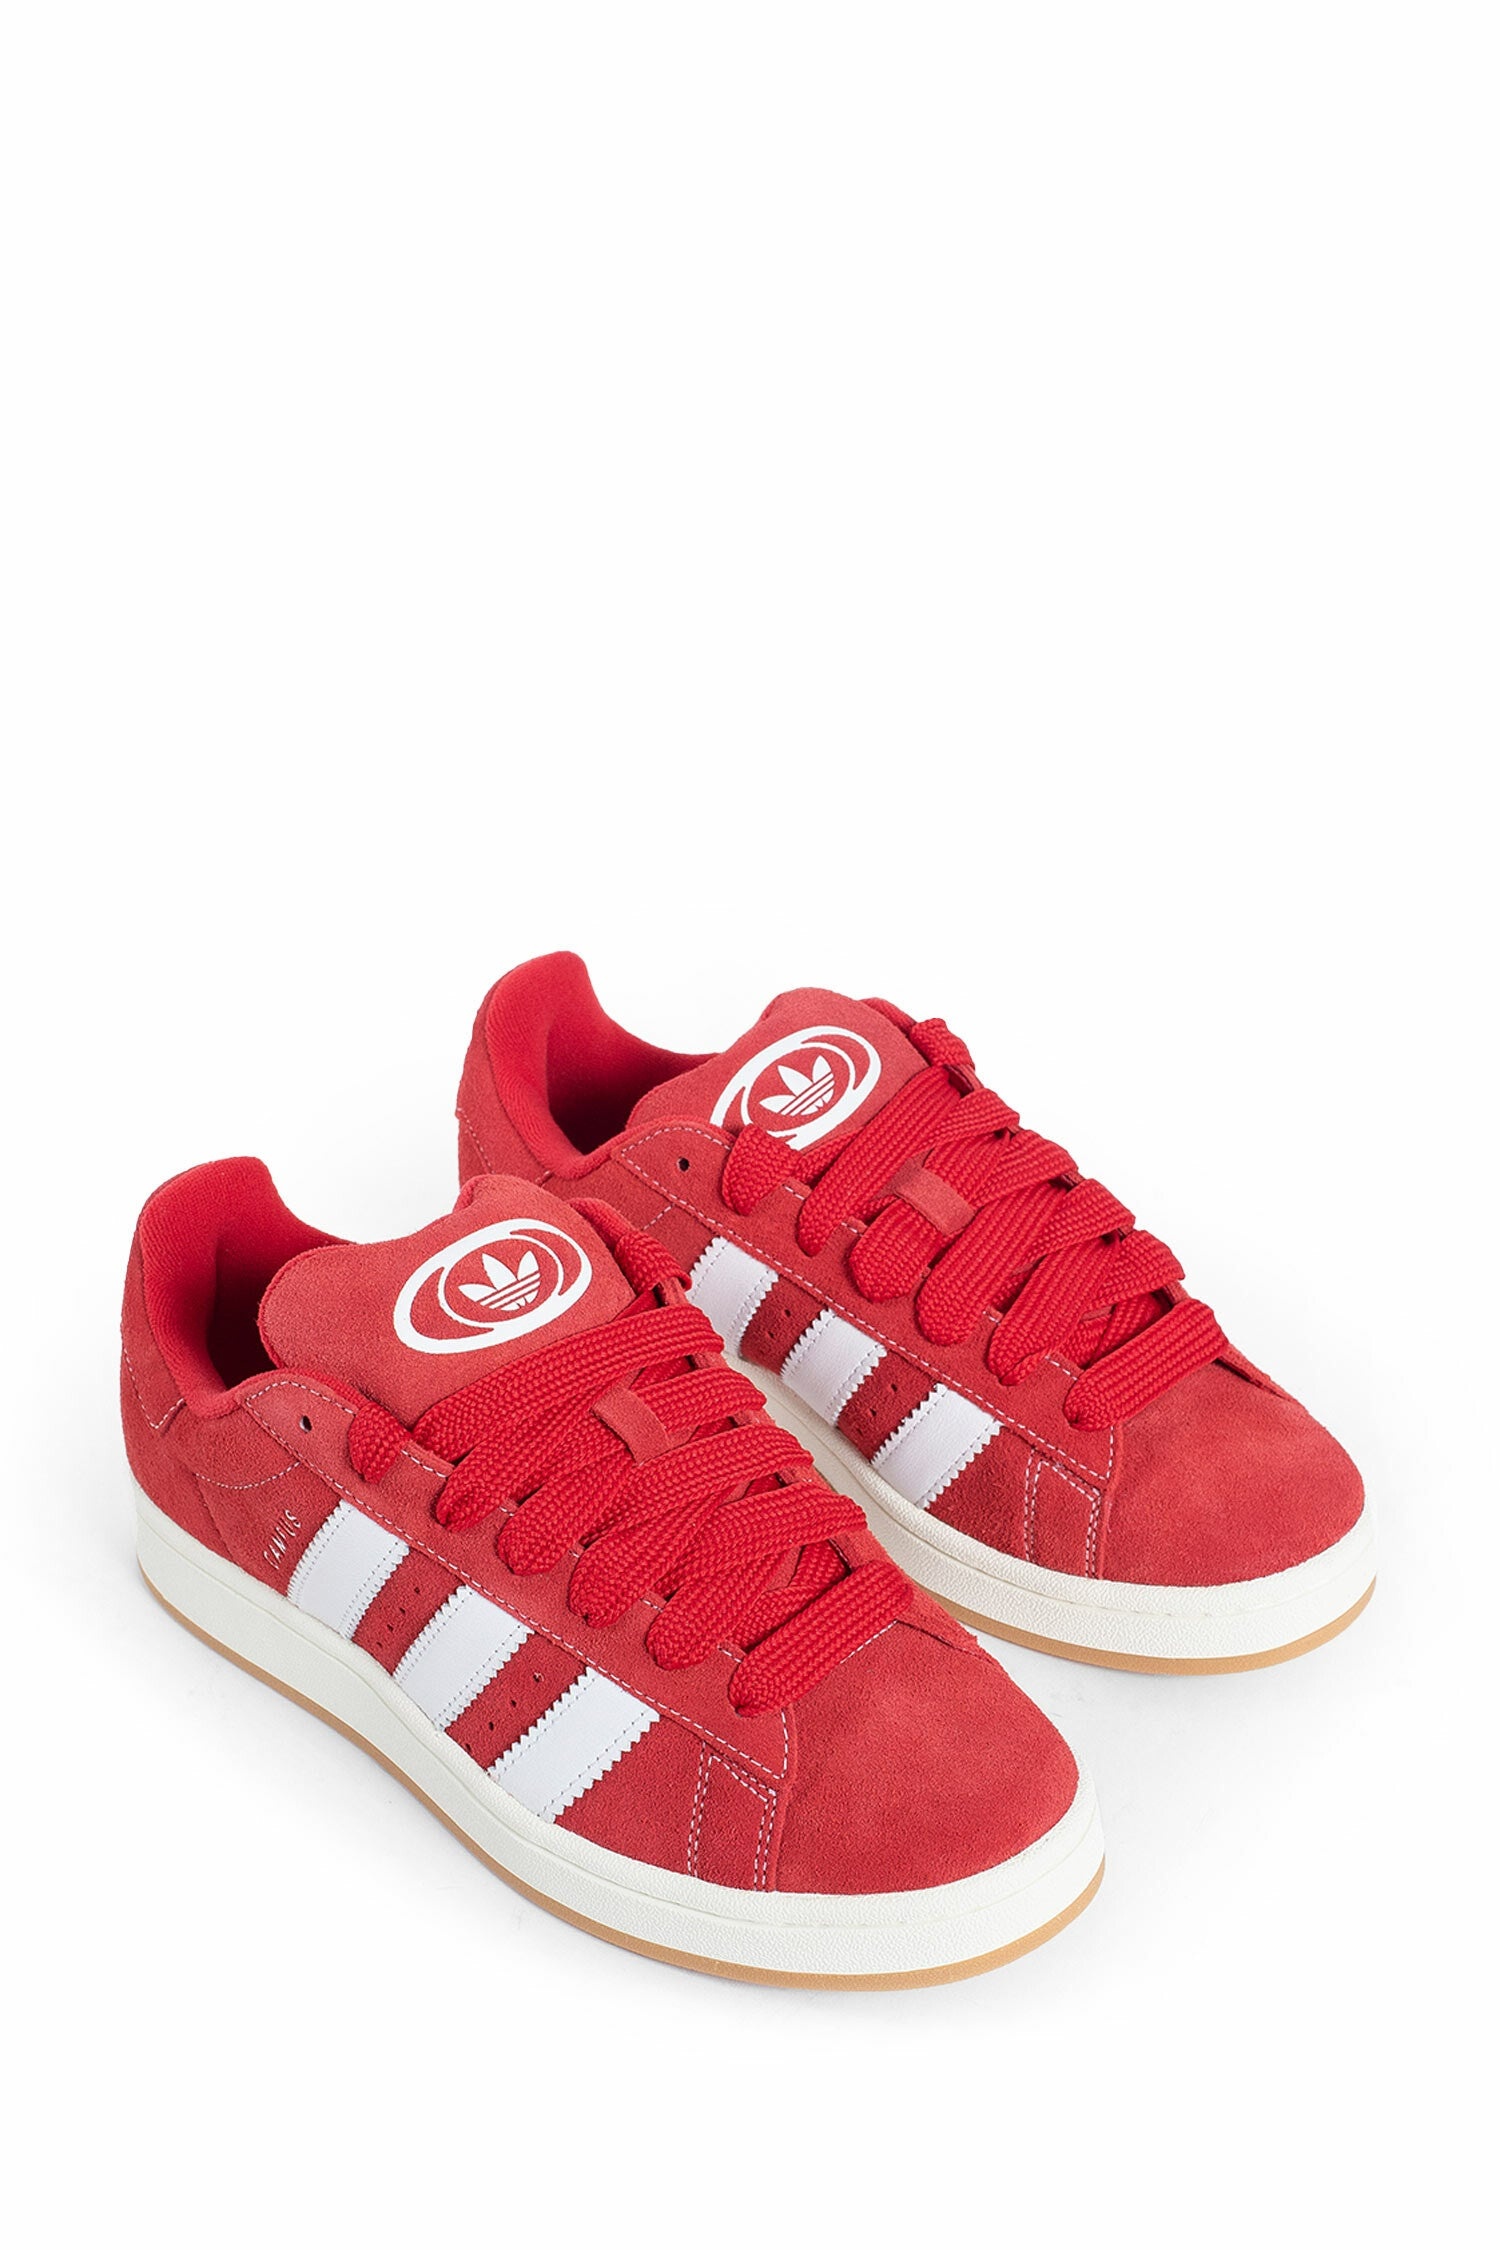 ADIDAS UNISEX RED SNEAKERS - 7